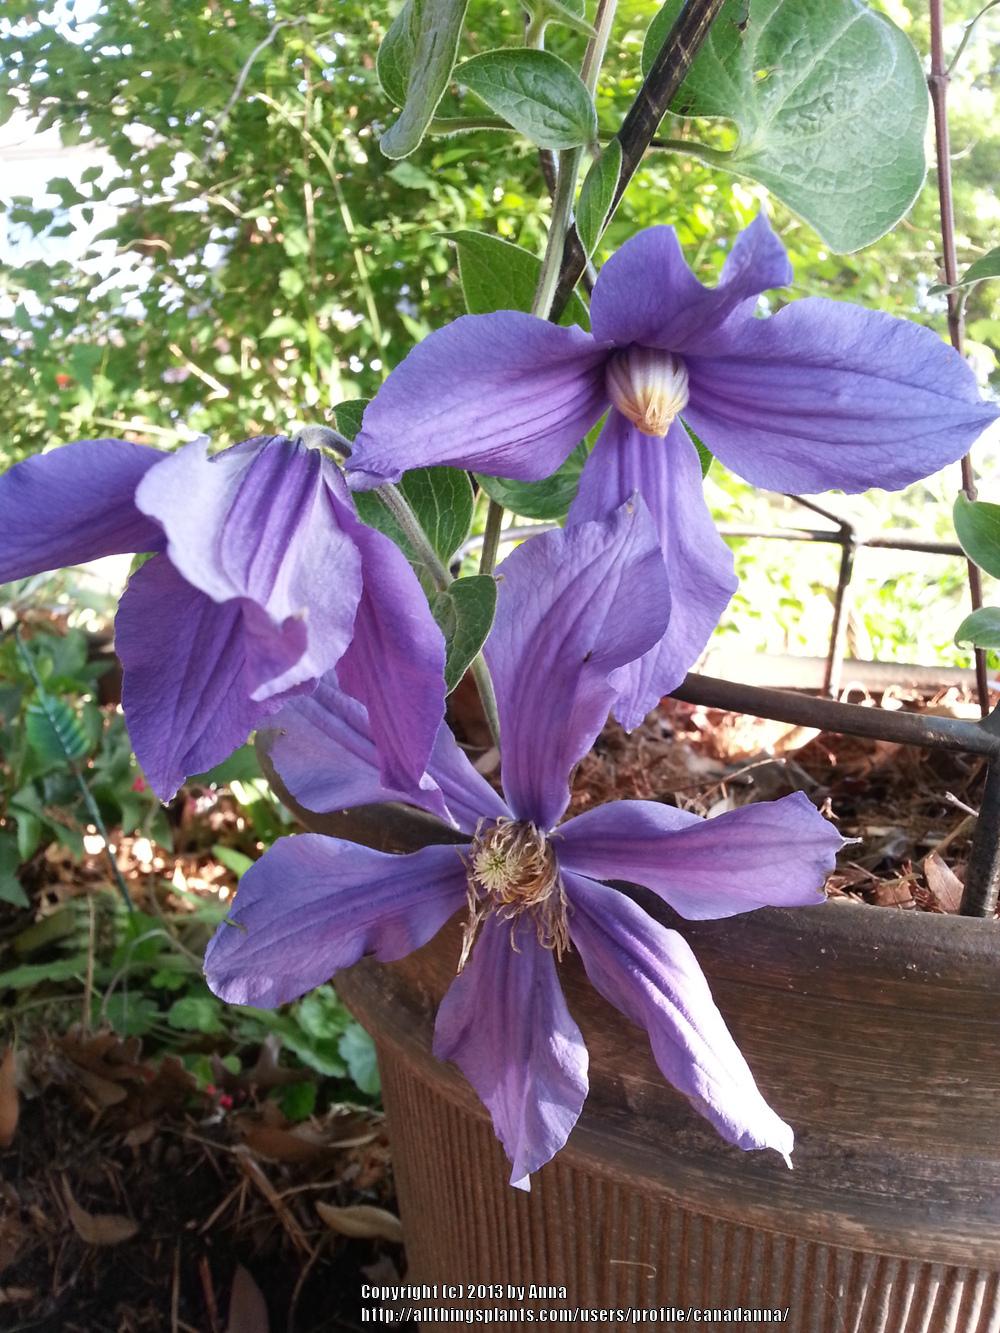 Photo of Clematis (Clematis durandii) uploaded by canadanna